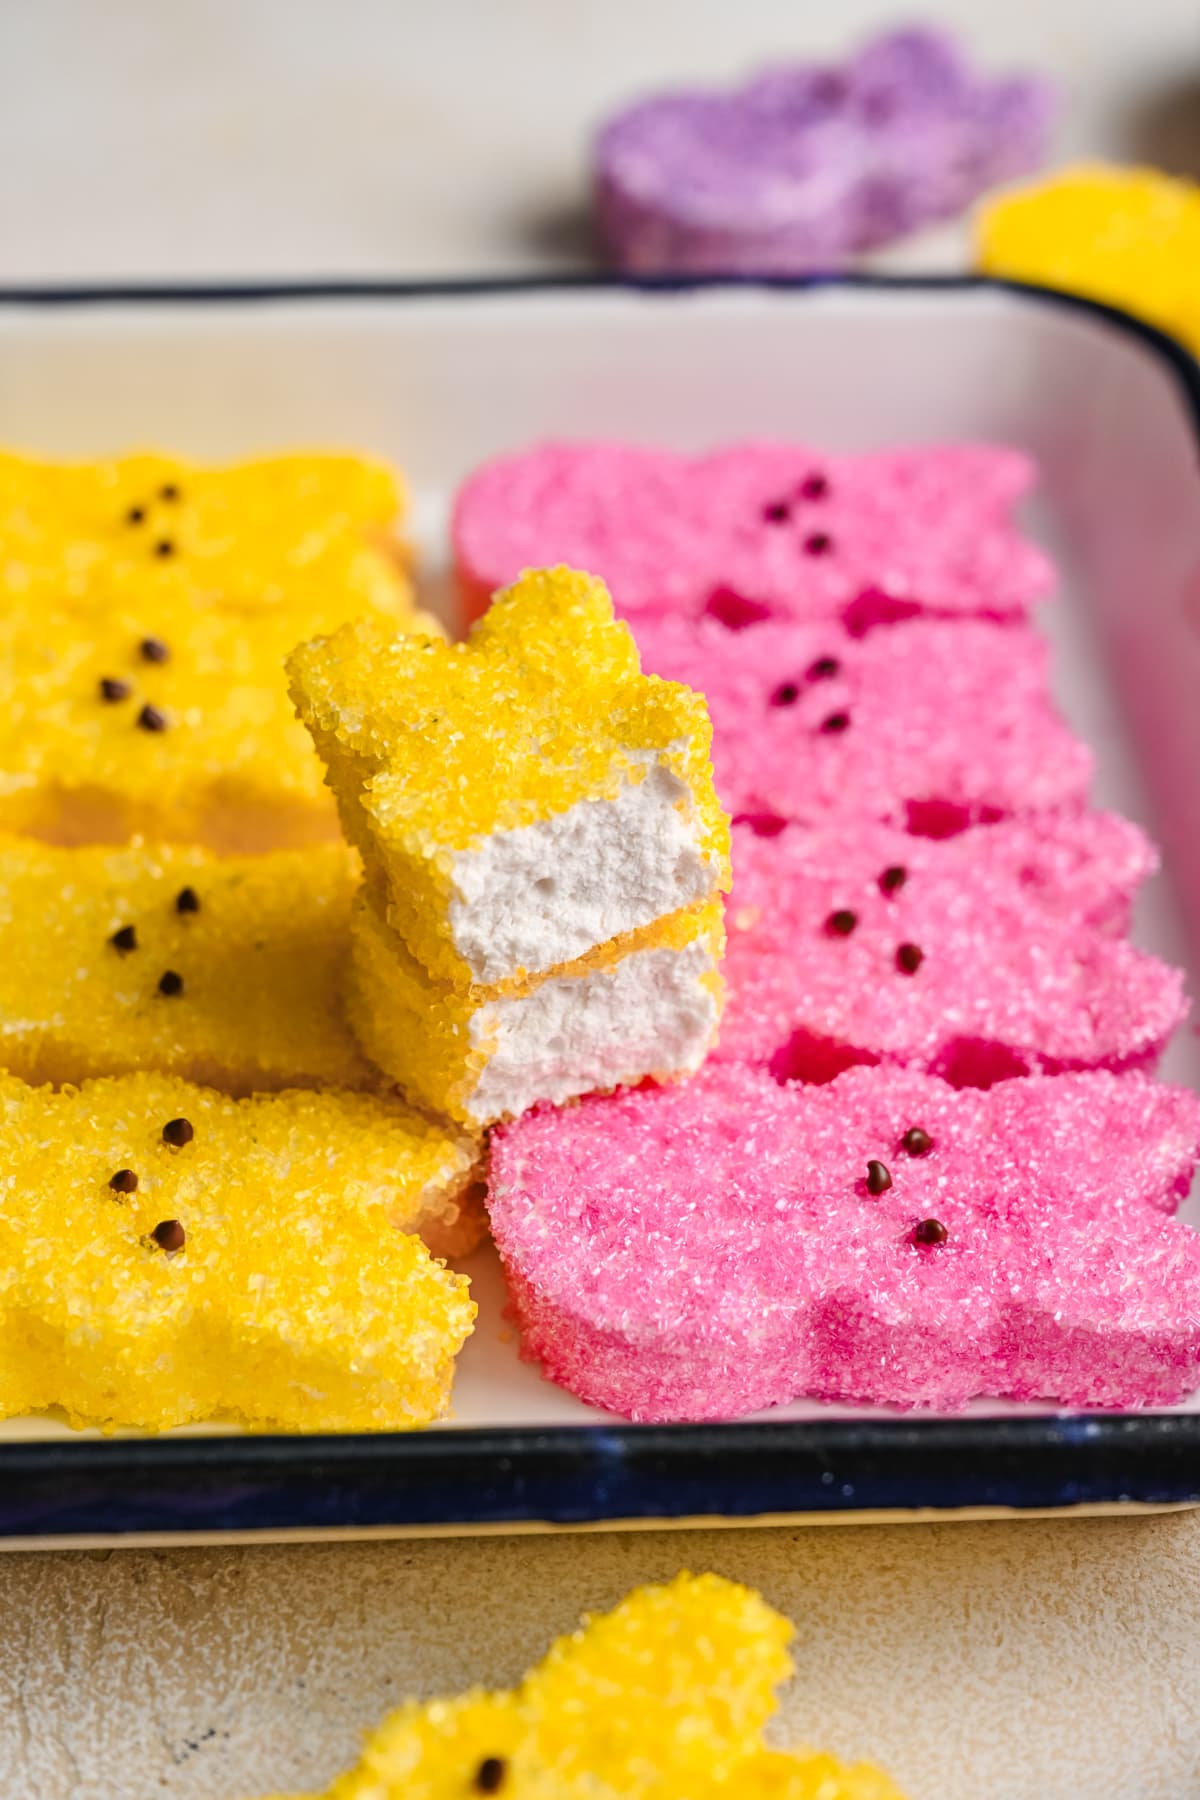 Front view of peep split in half to reveal marshmallow texture.